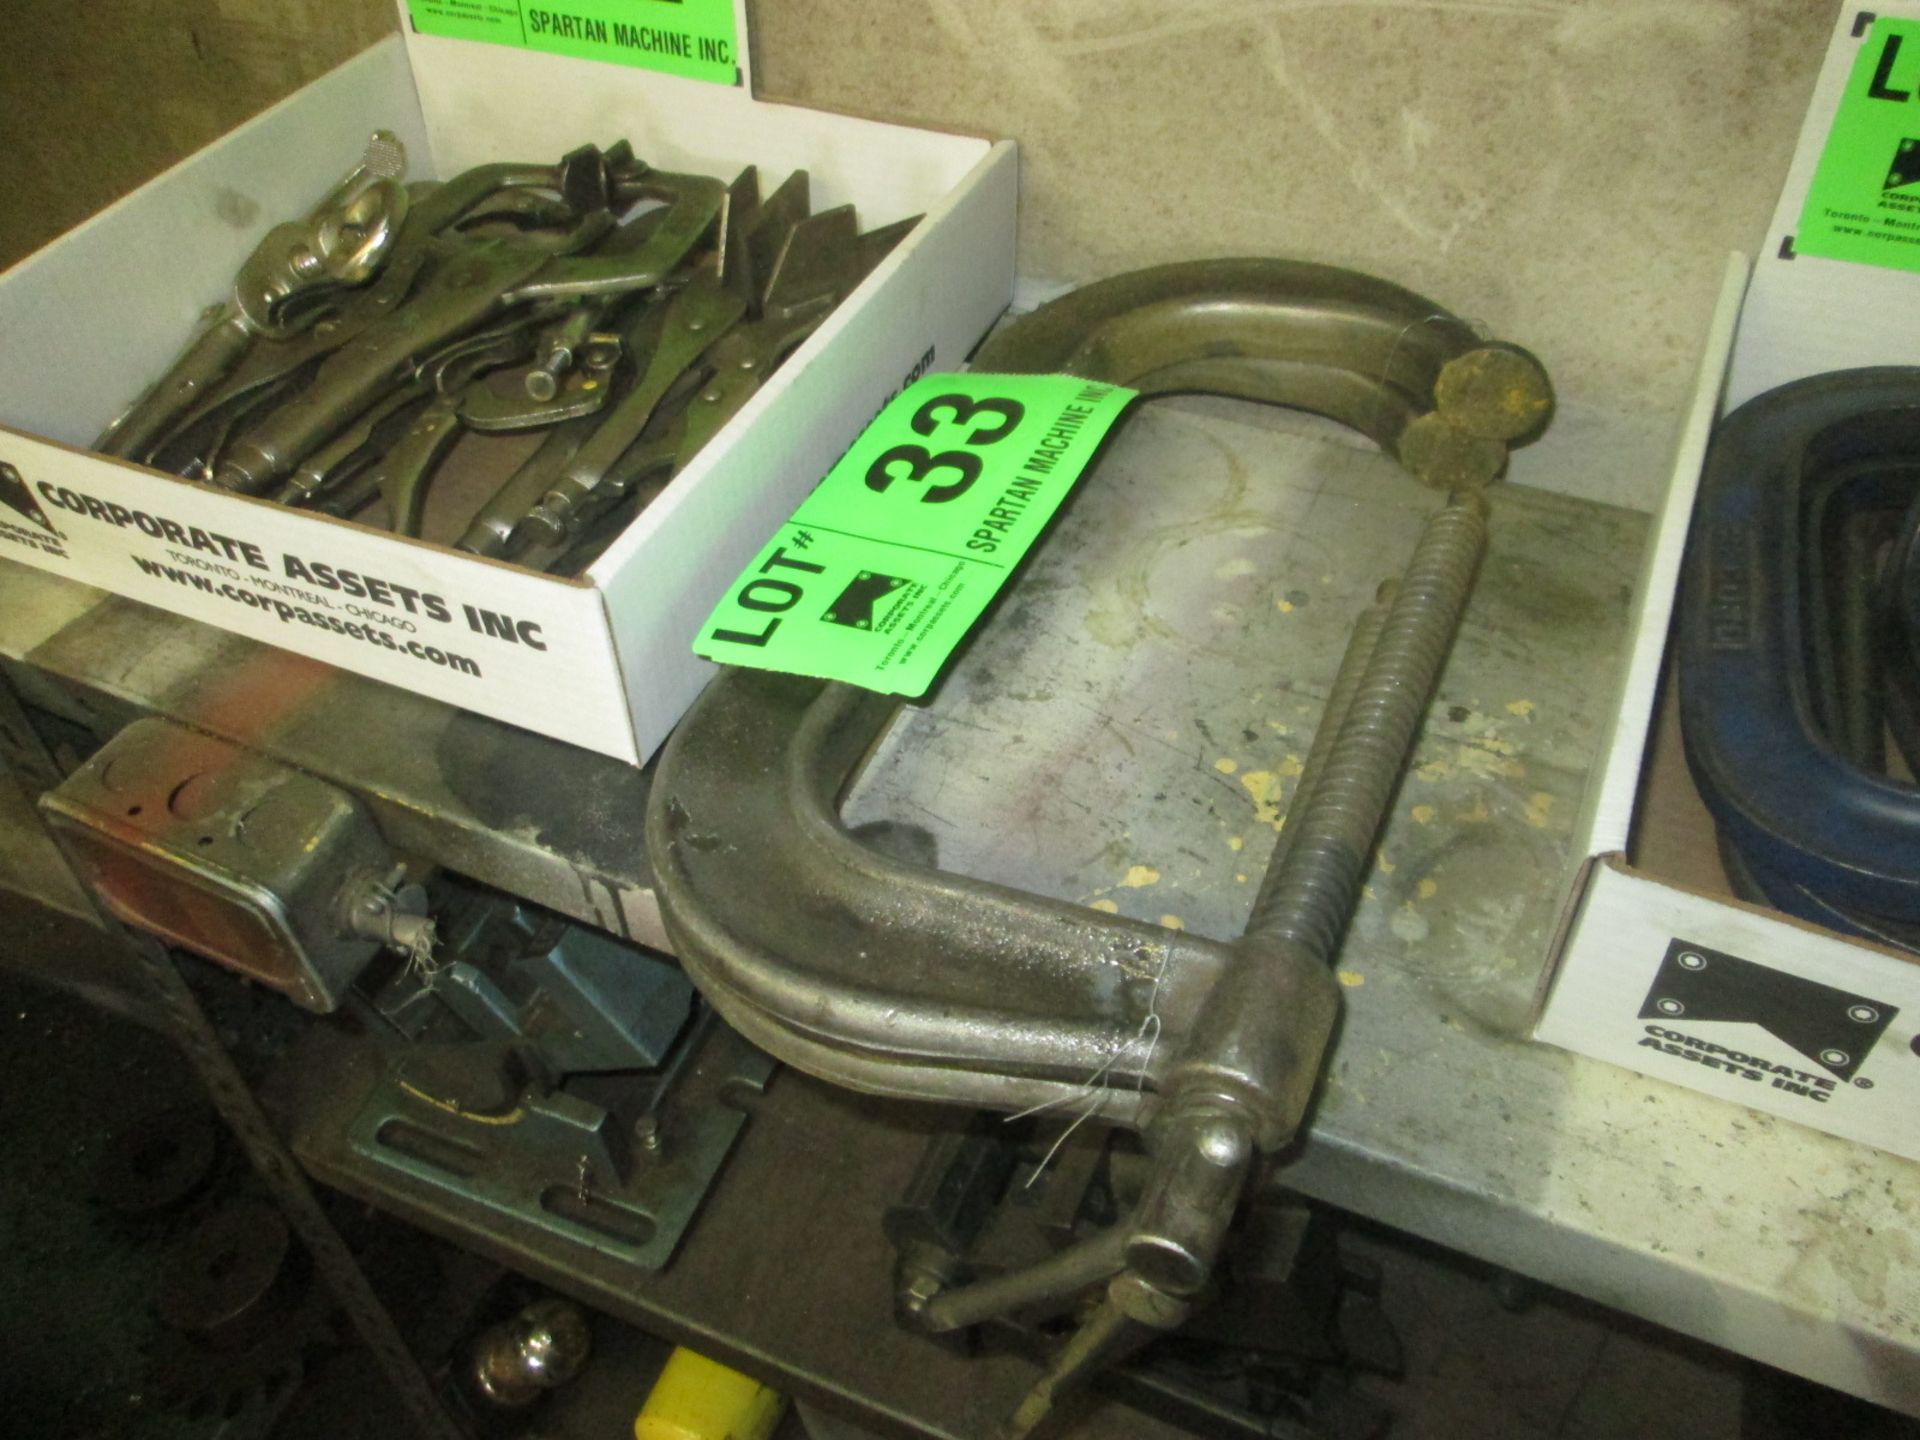 LOT/ C-CLAMPS